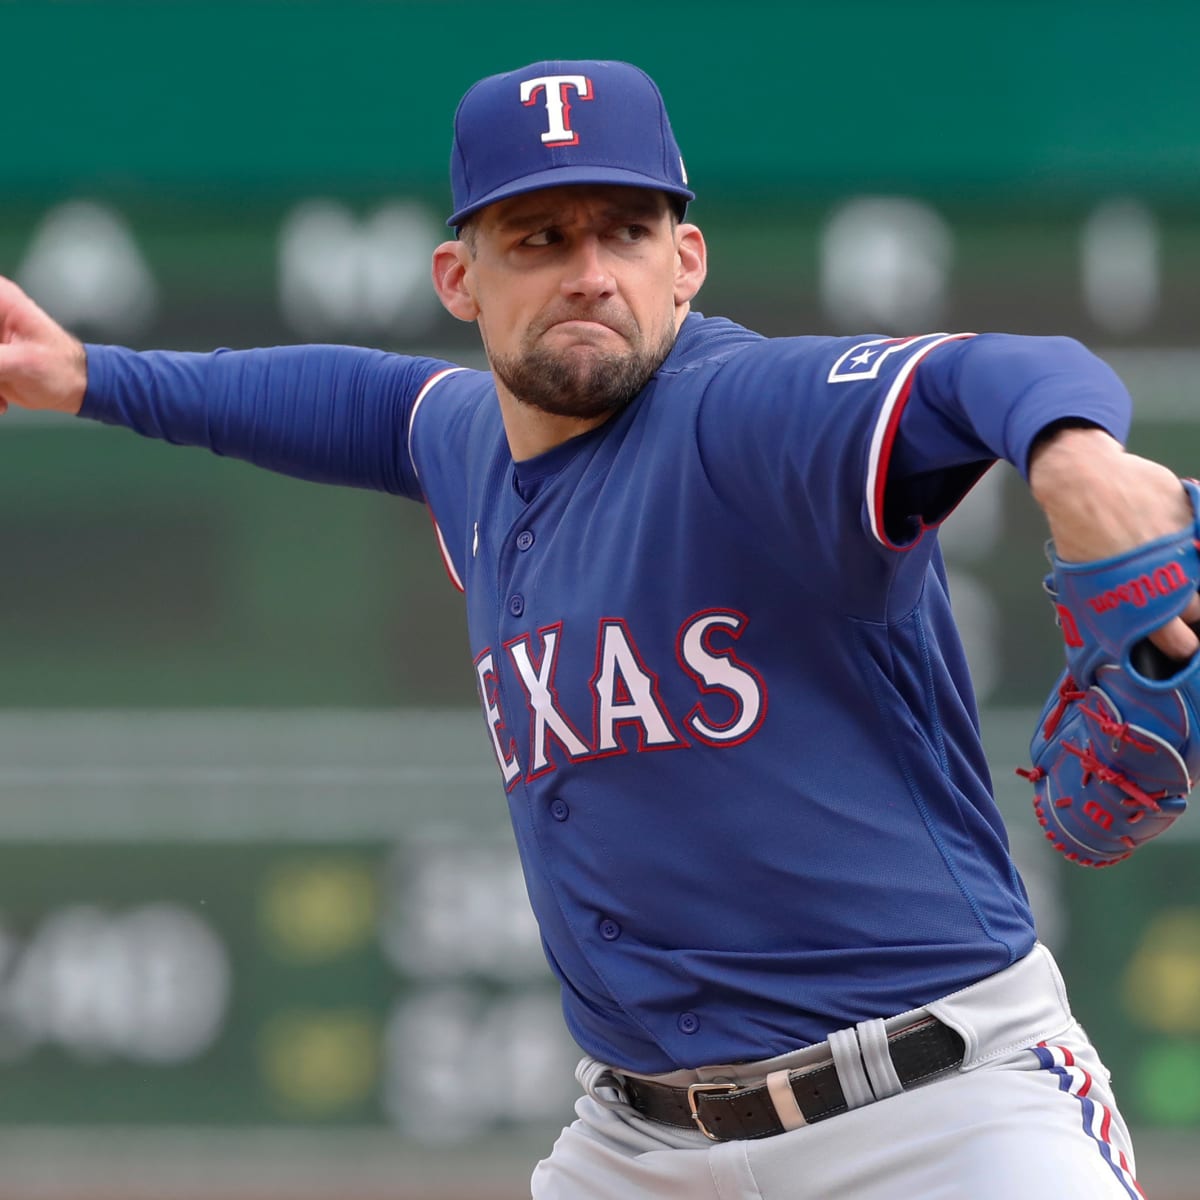 Texas Rangers Rivalry With Houston Astros Heated, But Hate Is Between  Fanbases - Sports Illustrated Texas Rangers News, Analysis and More